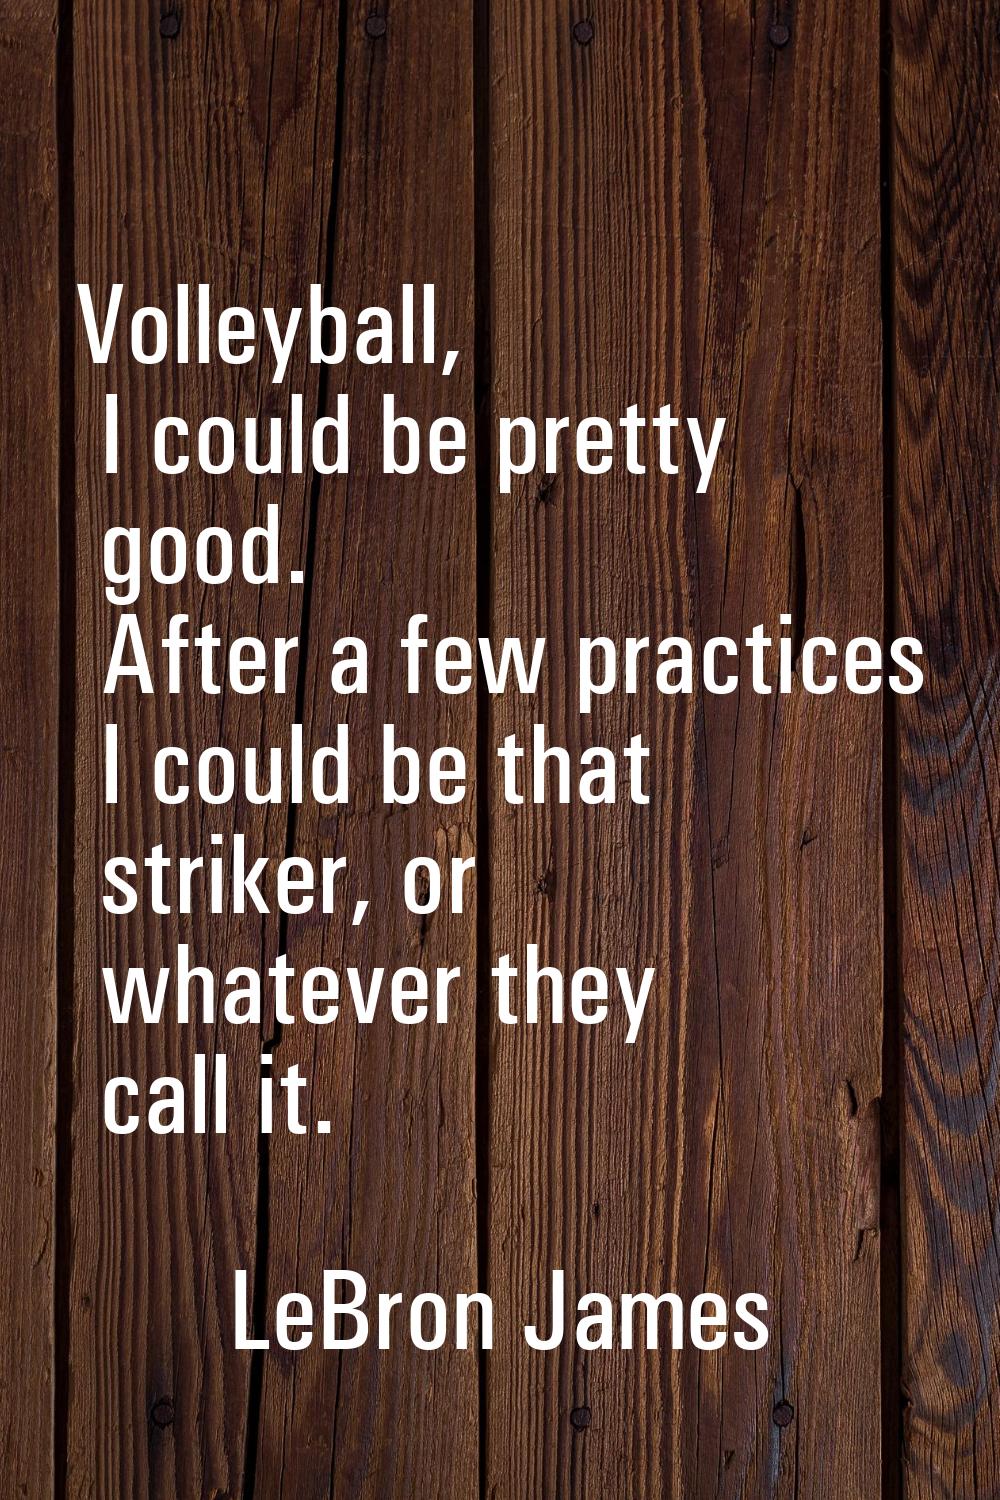 Volleyball, I could be pretty good. After a few practices I could be that striker, or whatever they